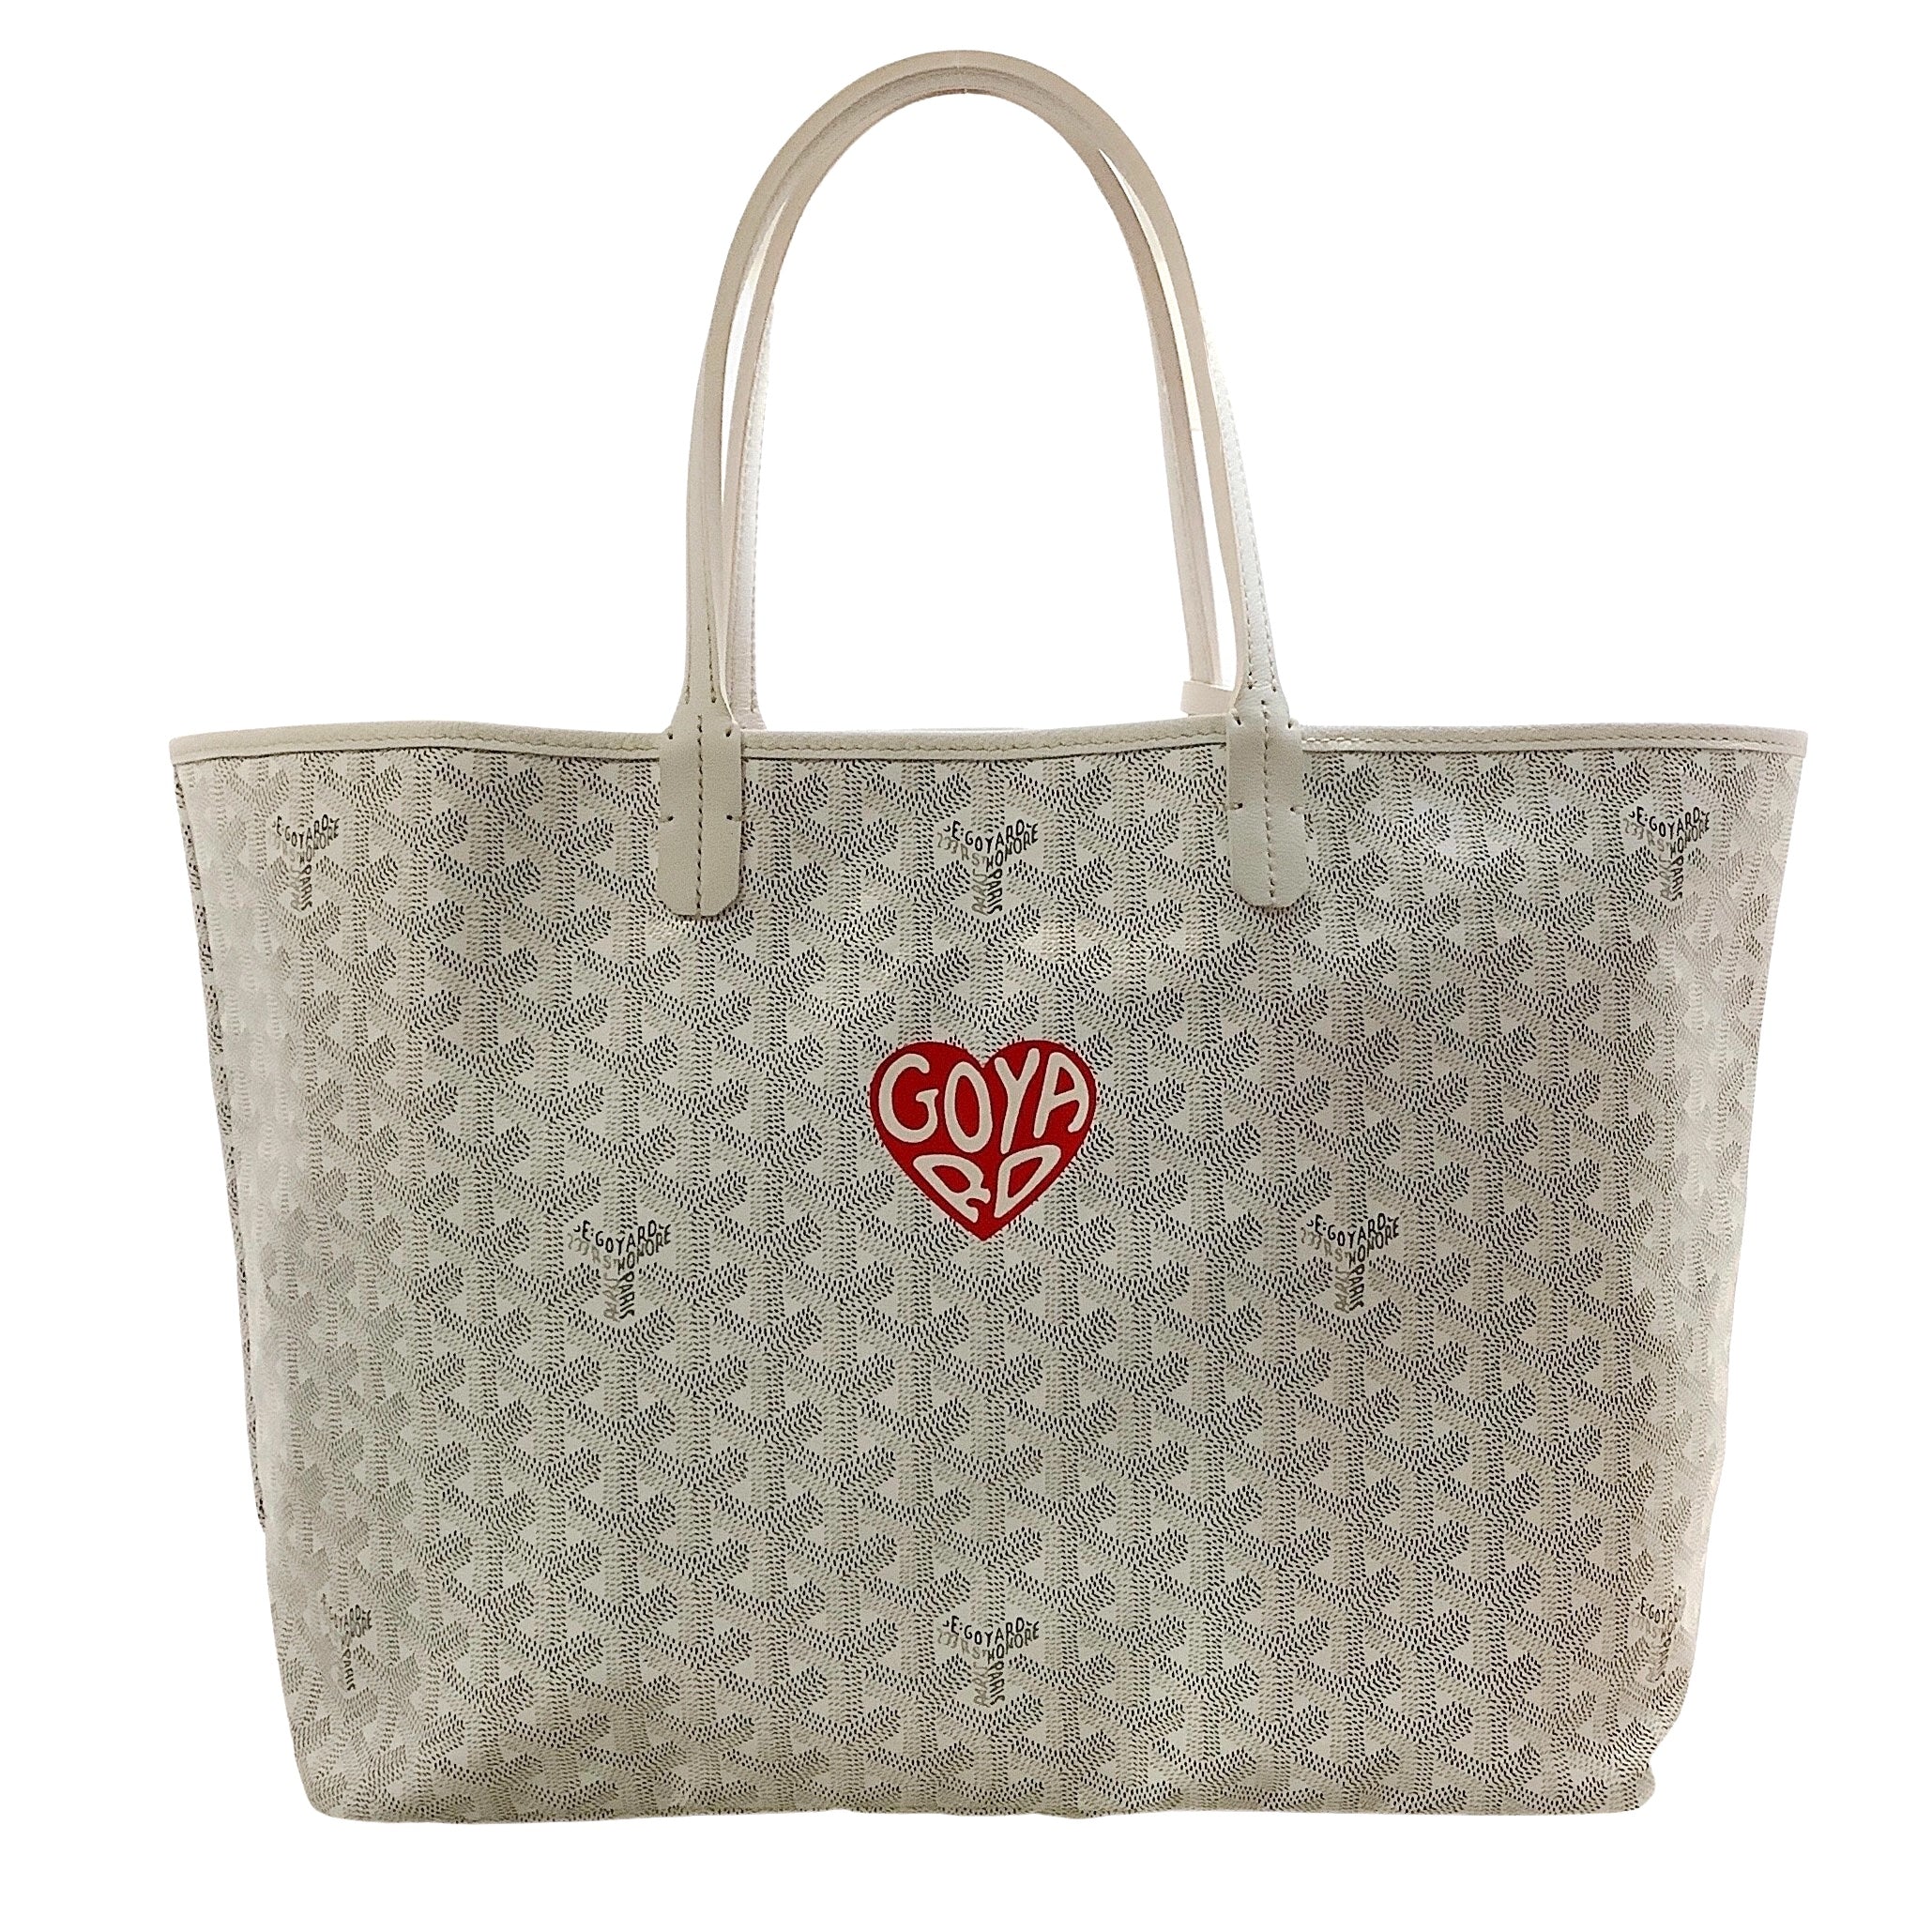 The Goyard Anjou bag is a FASHIONPHILE favorite, which size would